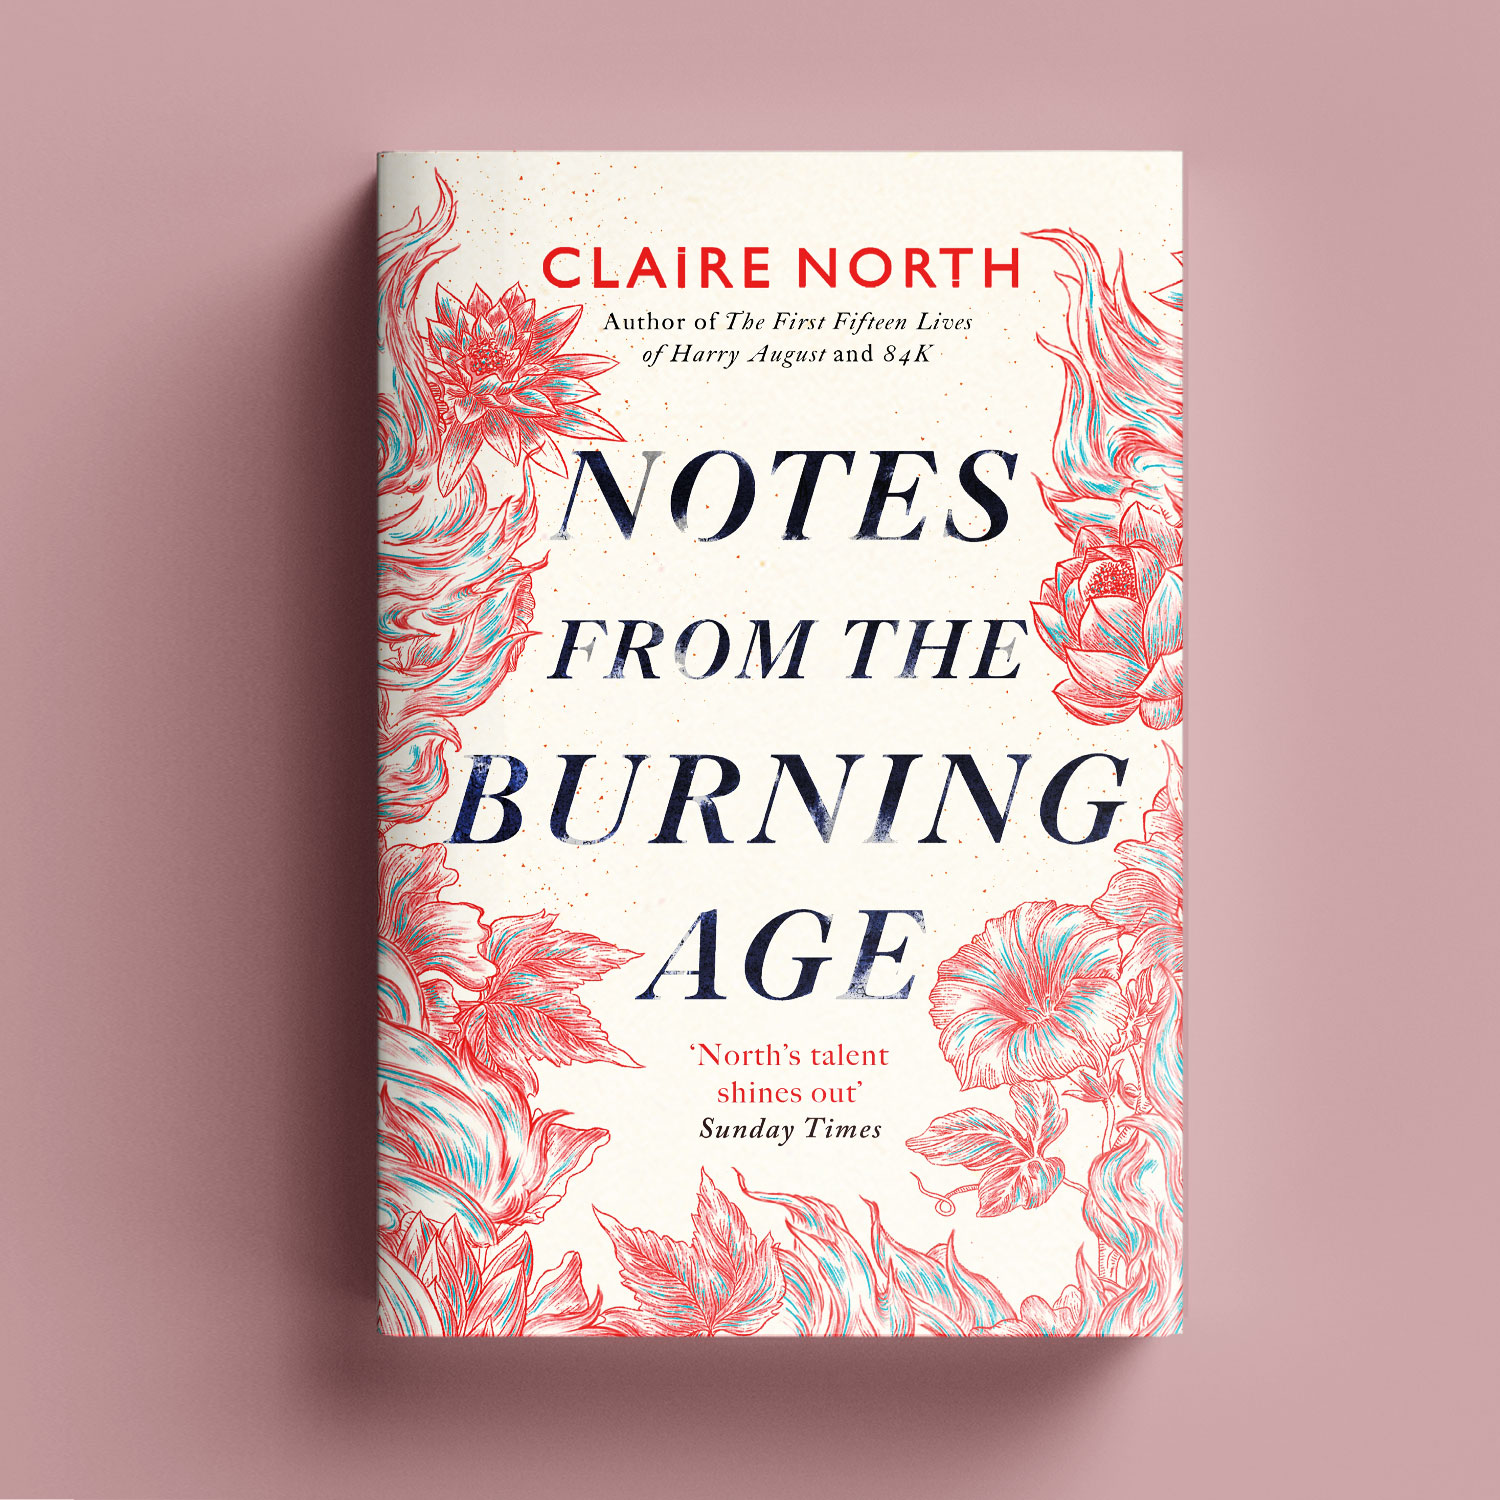 Notes from the Burning Age by Claire North